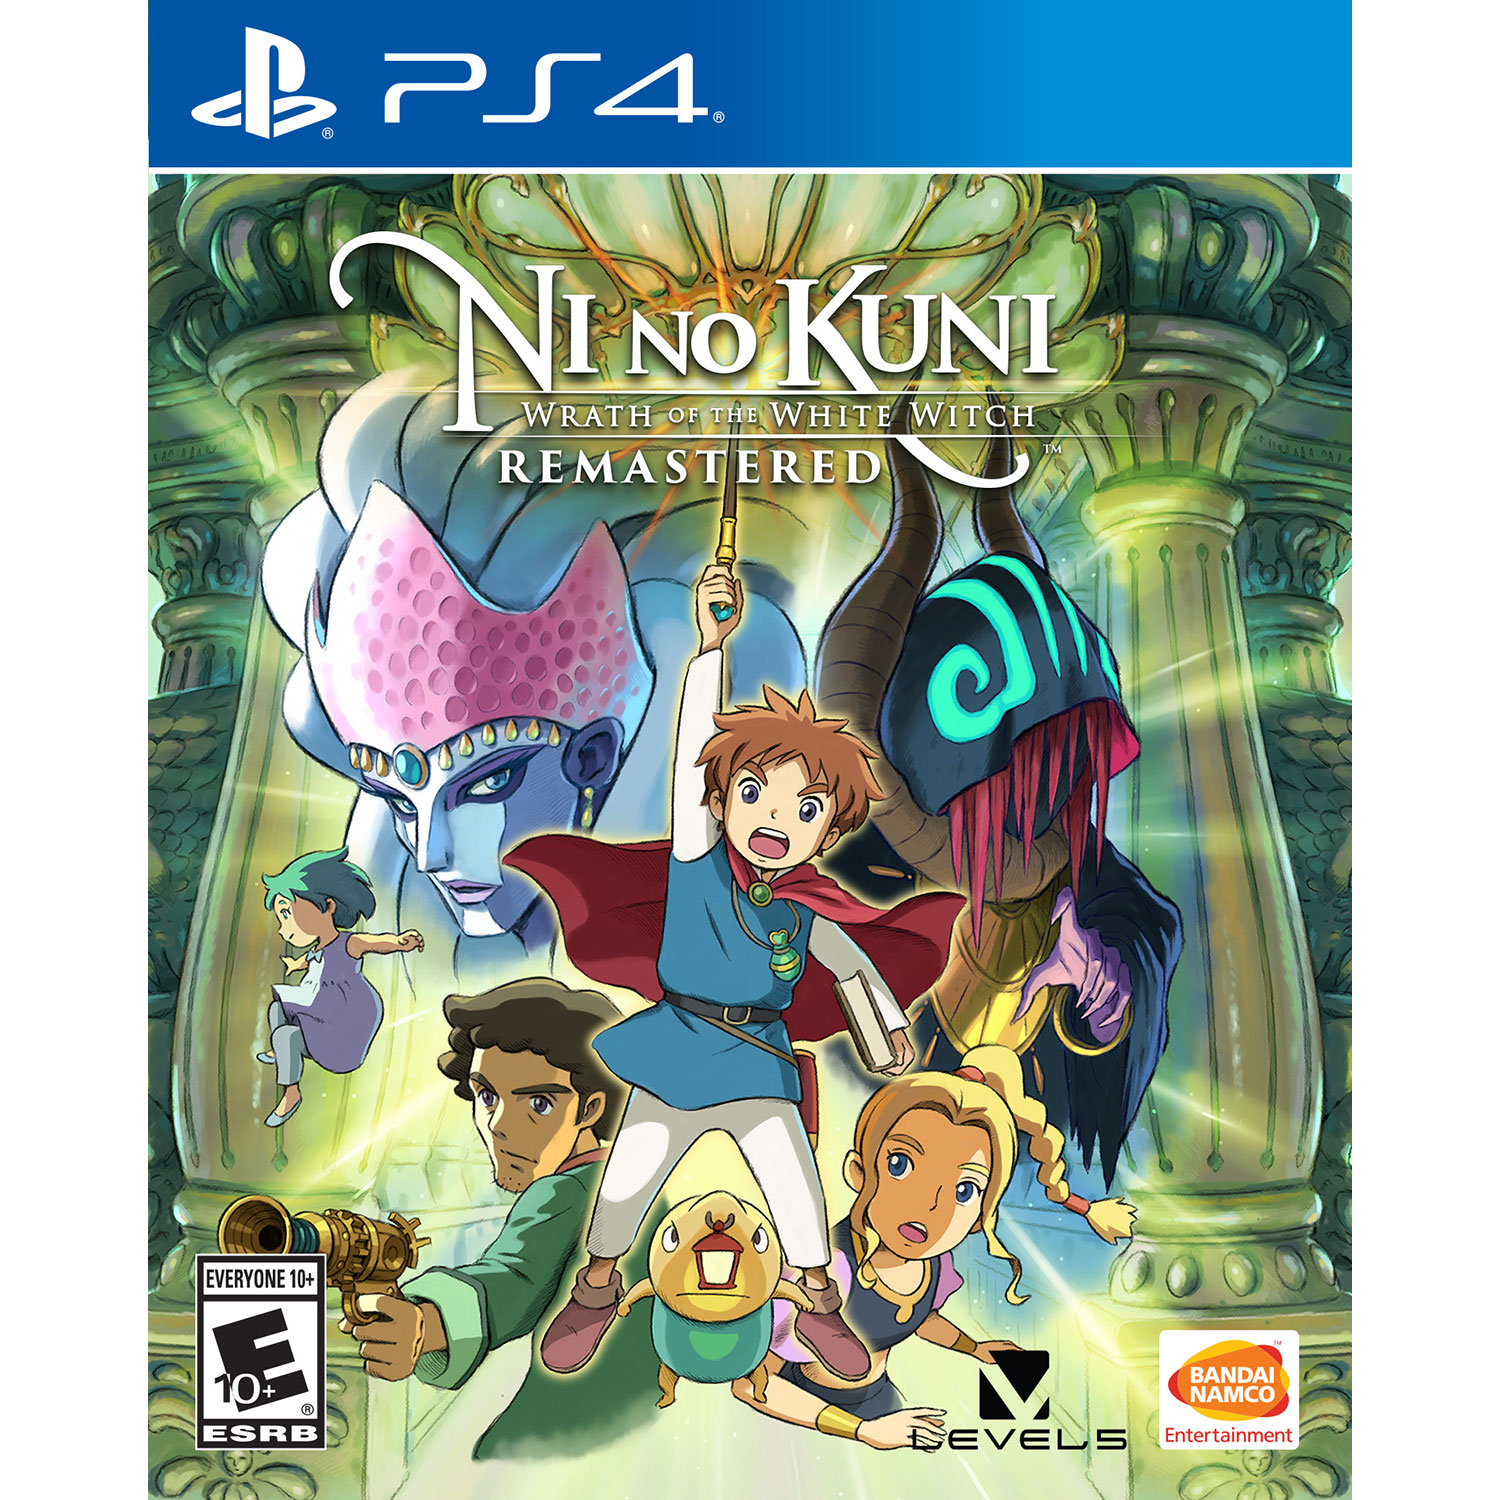 Ni no Kuni: Wrath of the White Witch Remastered (PS4) $5.87